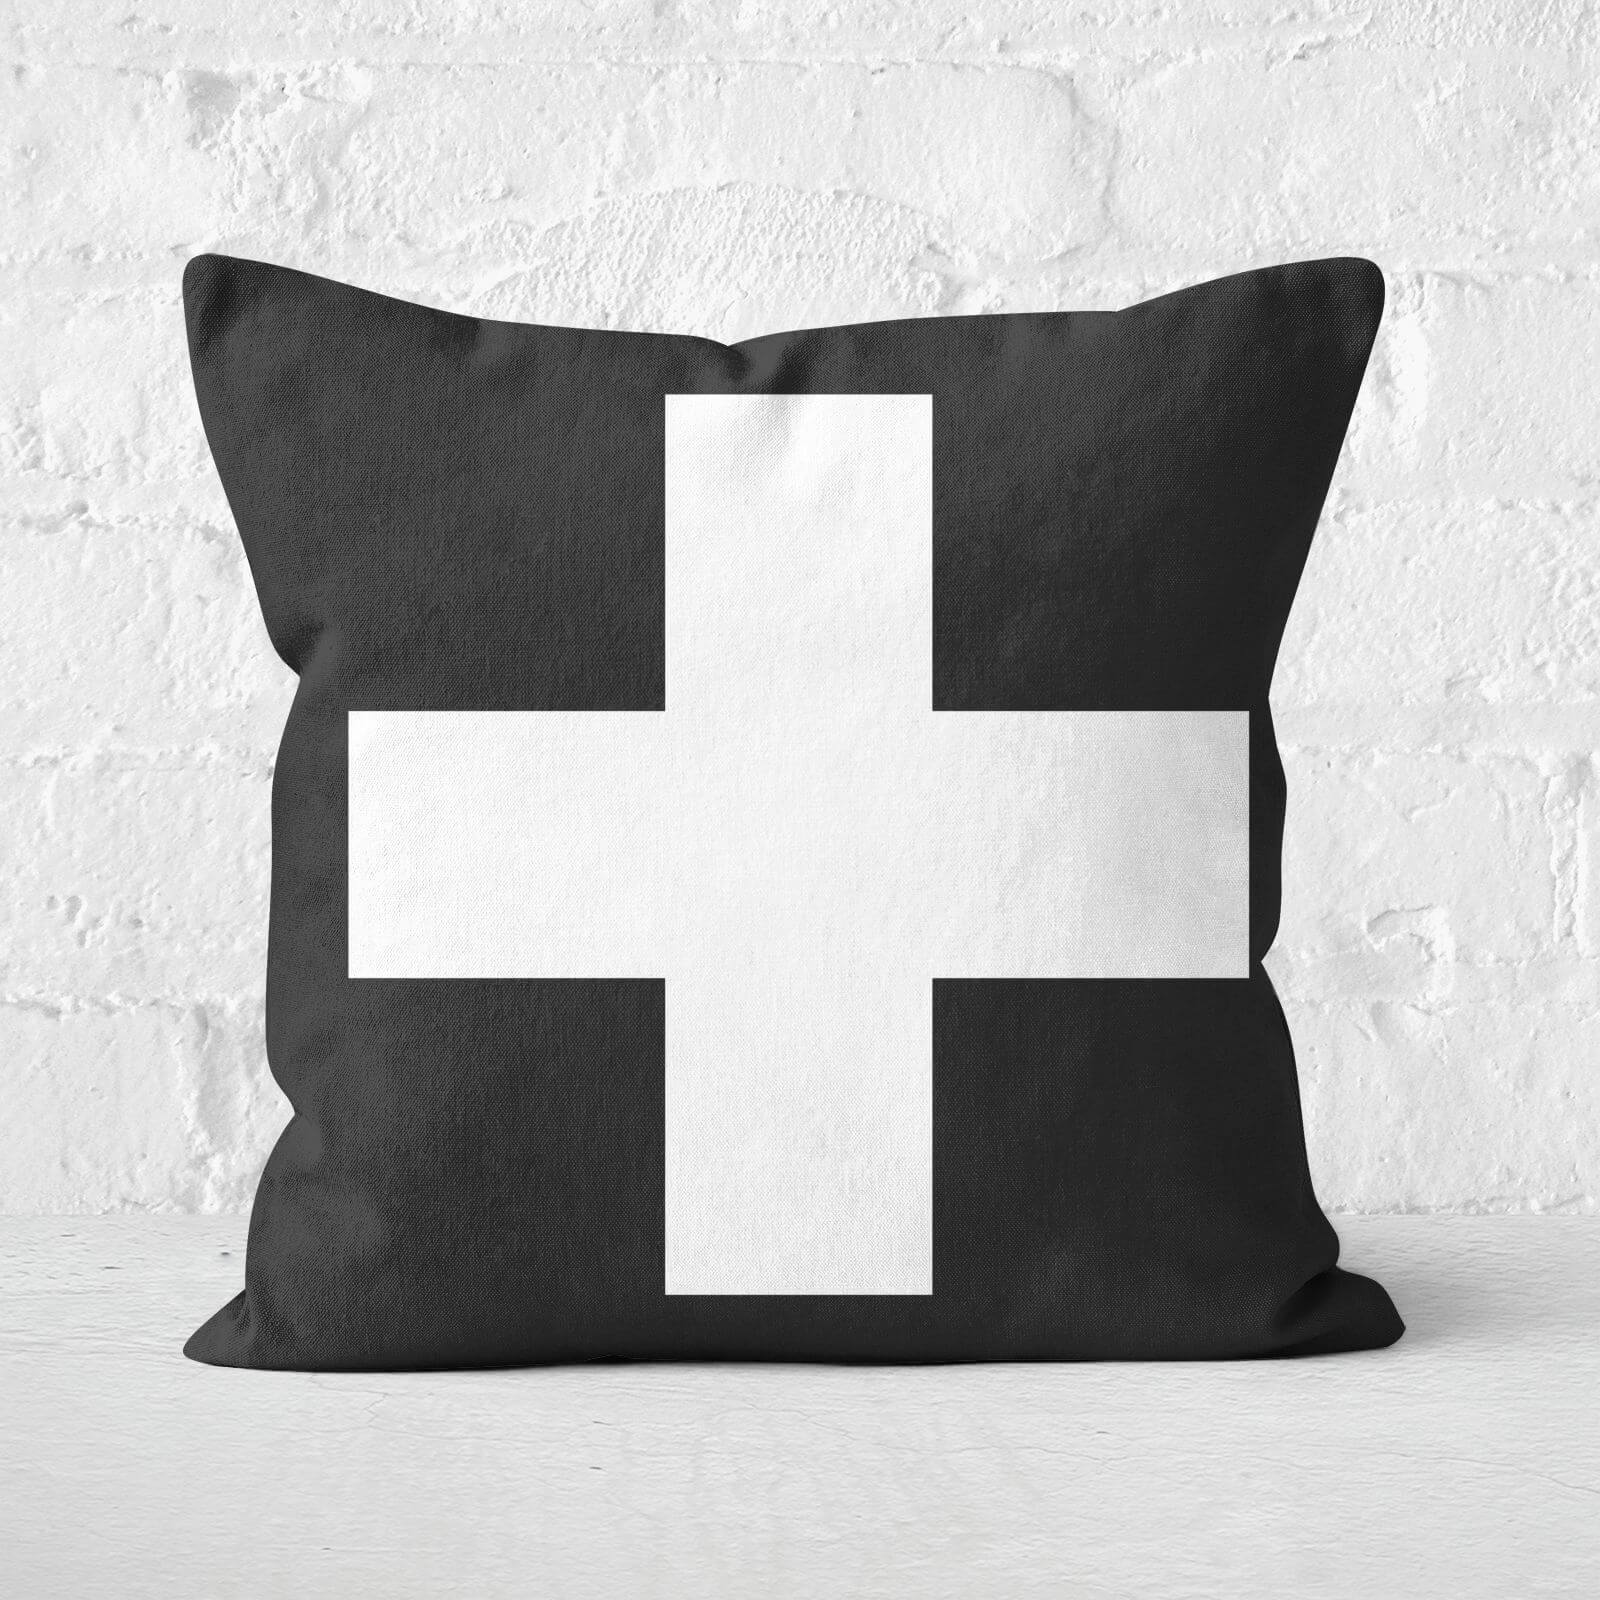 The Motivated Type Swiss Cross Square Cushion - 60x60cm - Soft Touch